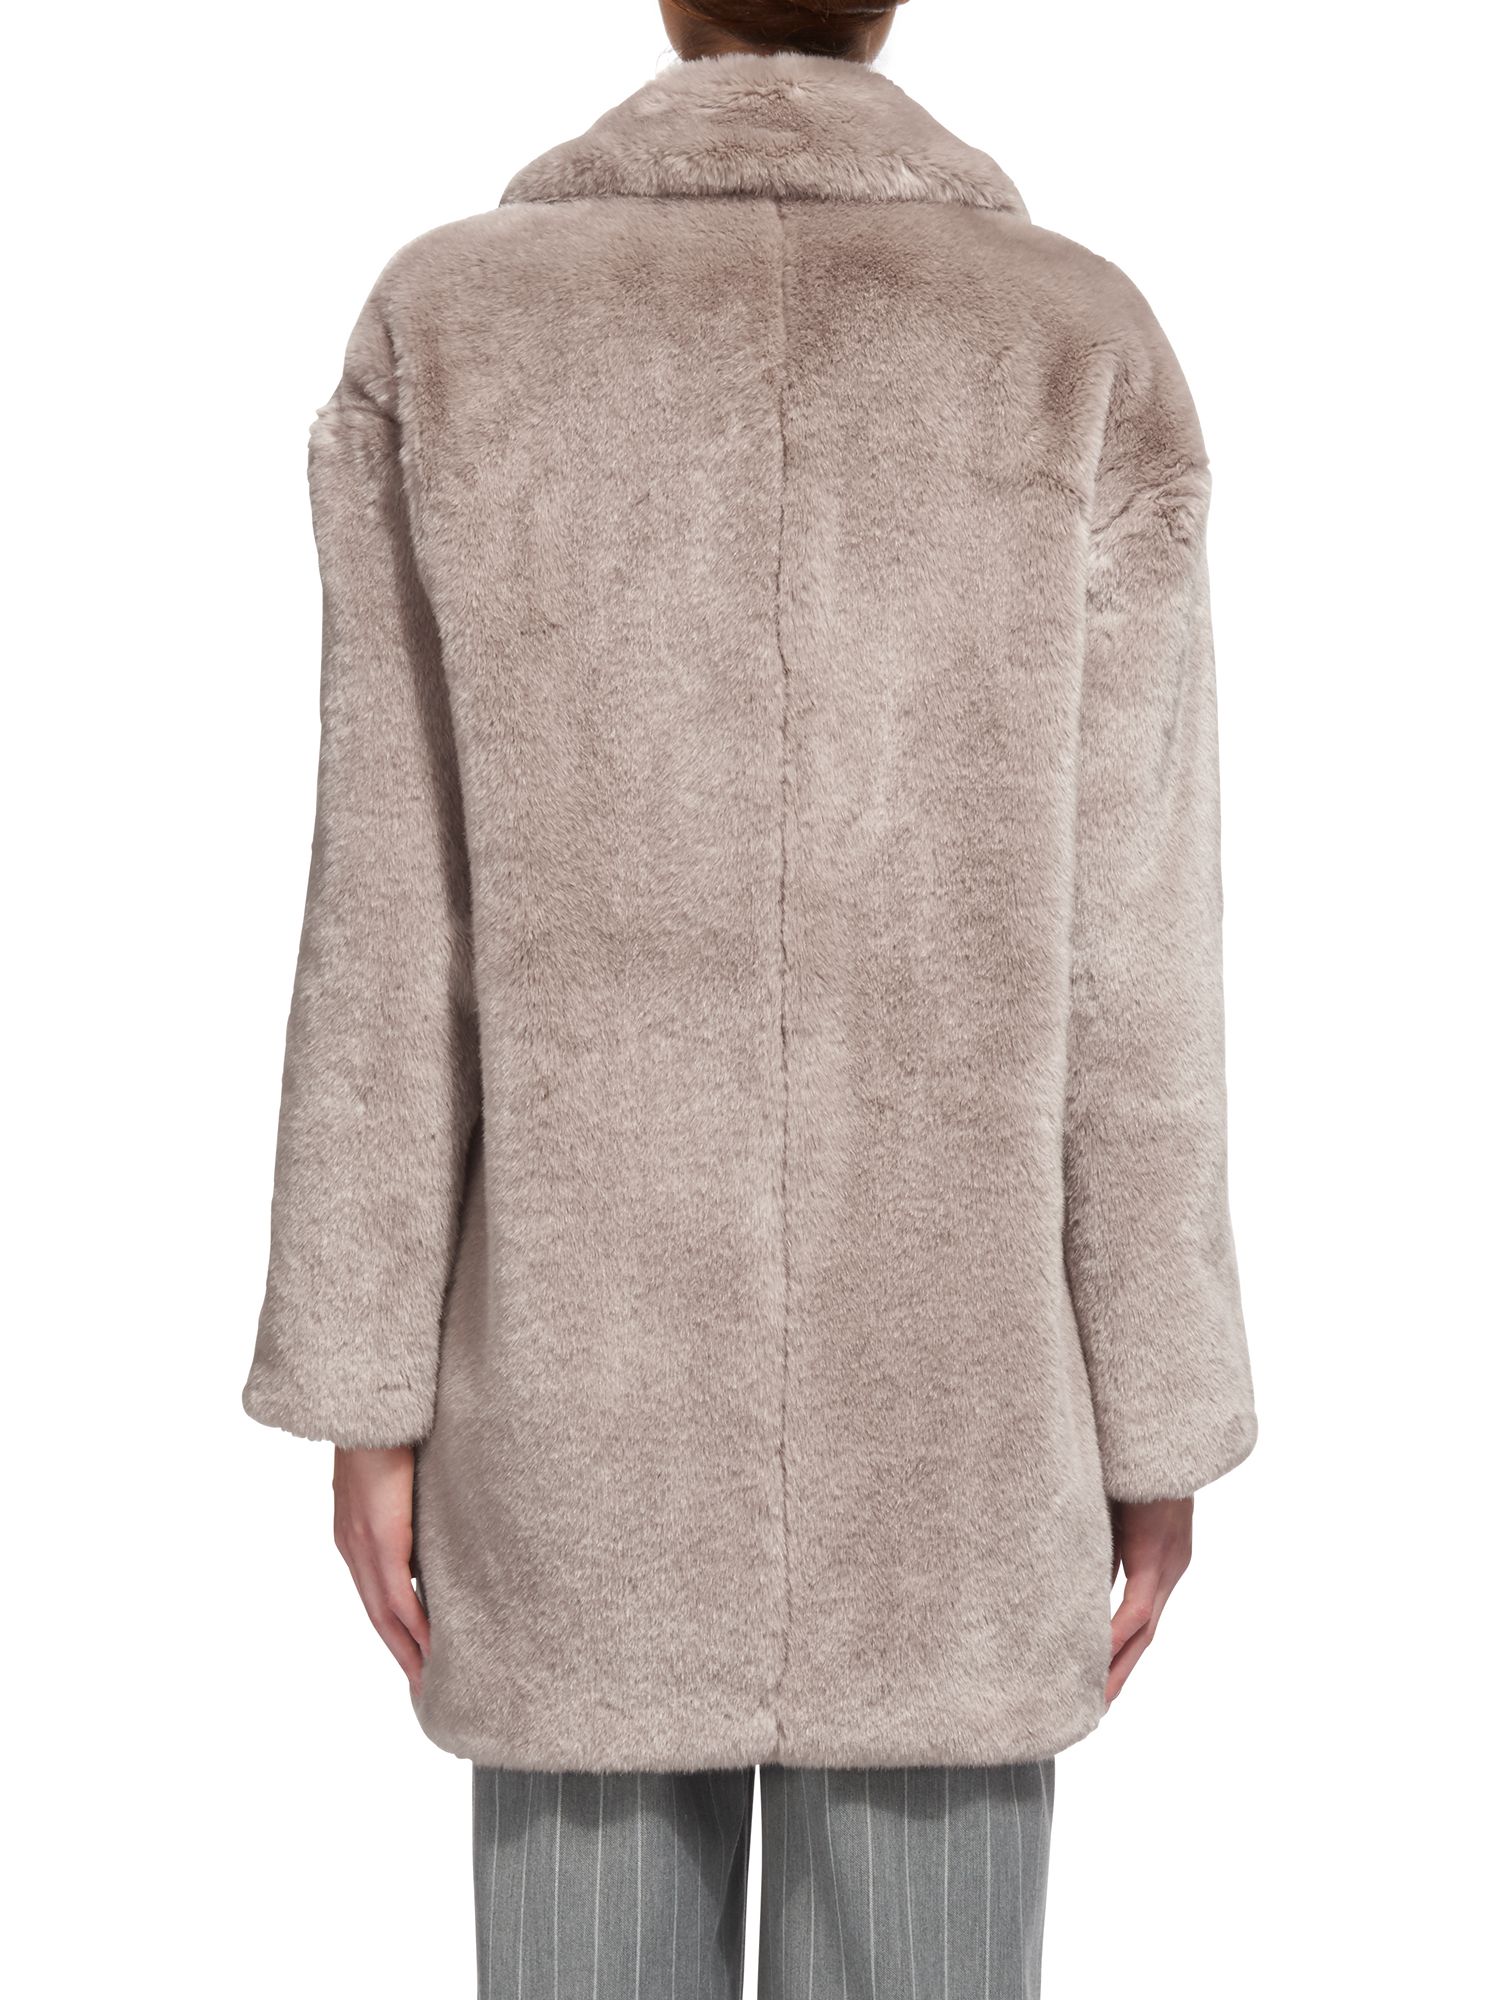 Whistles Faux Fur Cocoon Coat at John Lewis & Partners